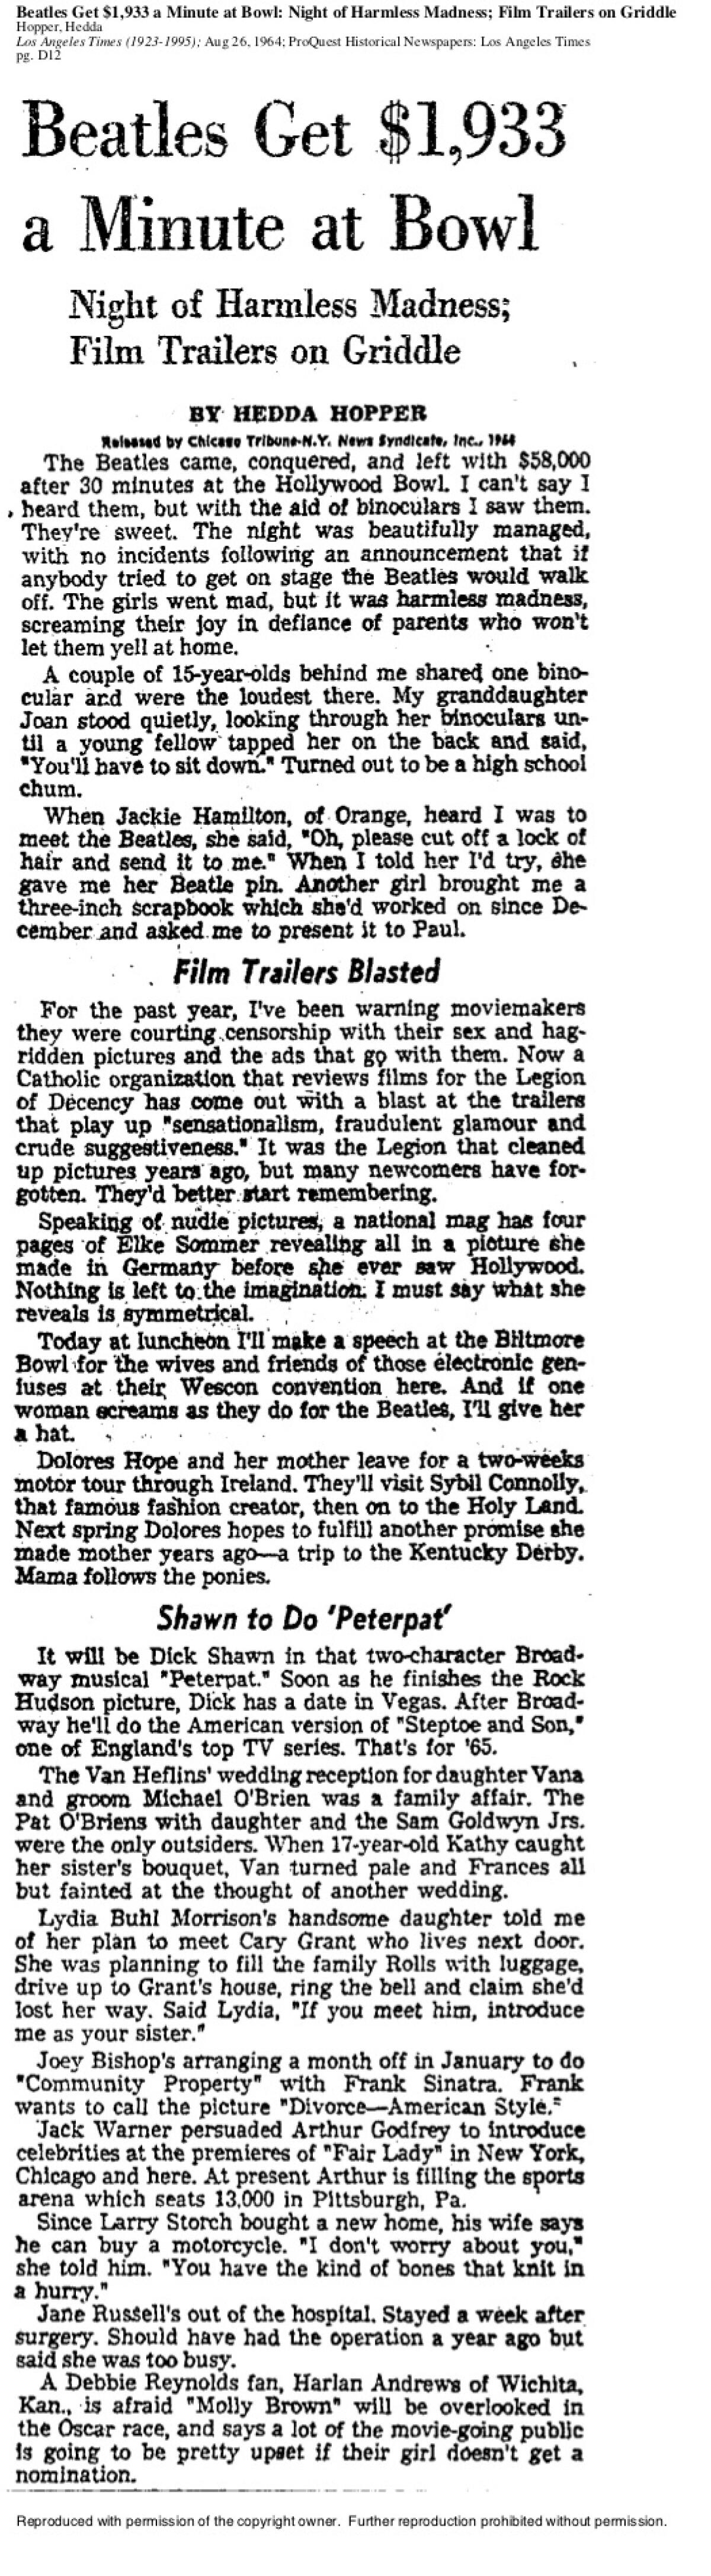 August 26, 1964: Times' gossip columnist Hedda Hopper wrote a tongue-in-cheek column about the Beatles' appearance at the Hollywood Bowl that summer.